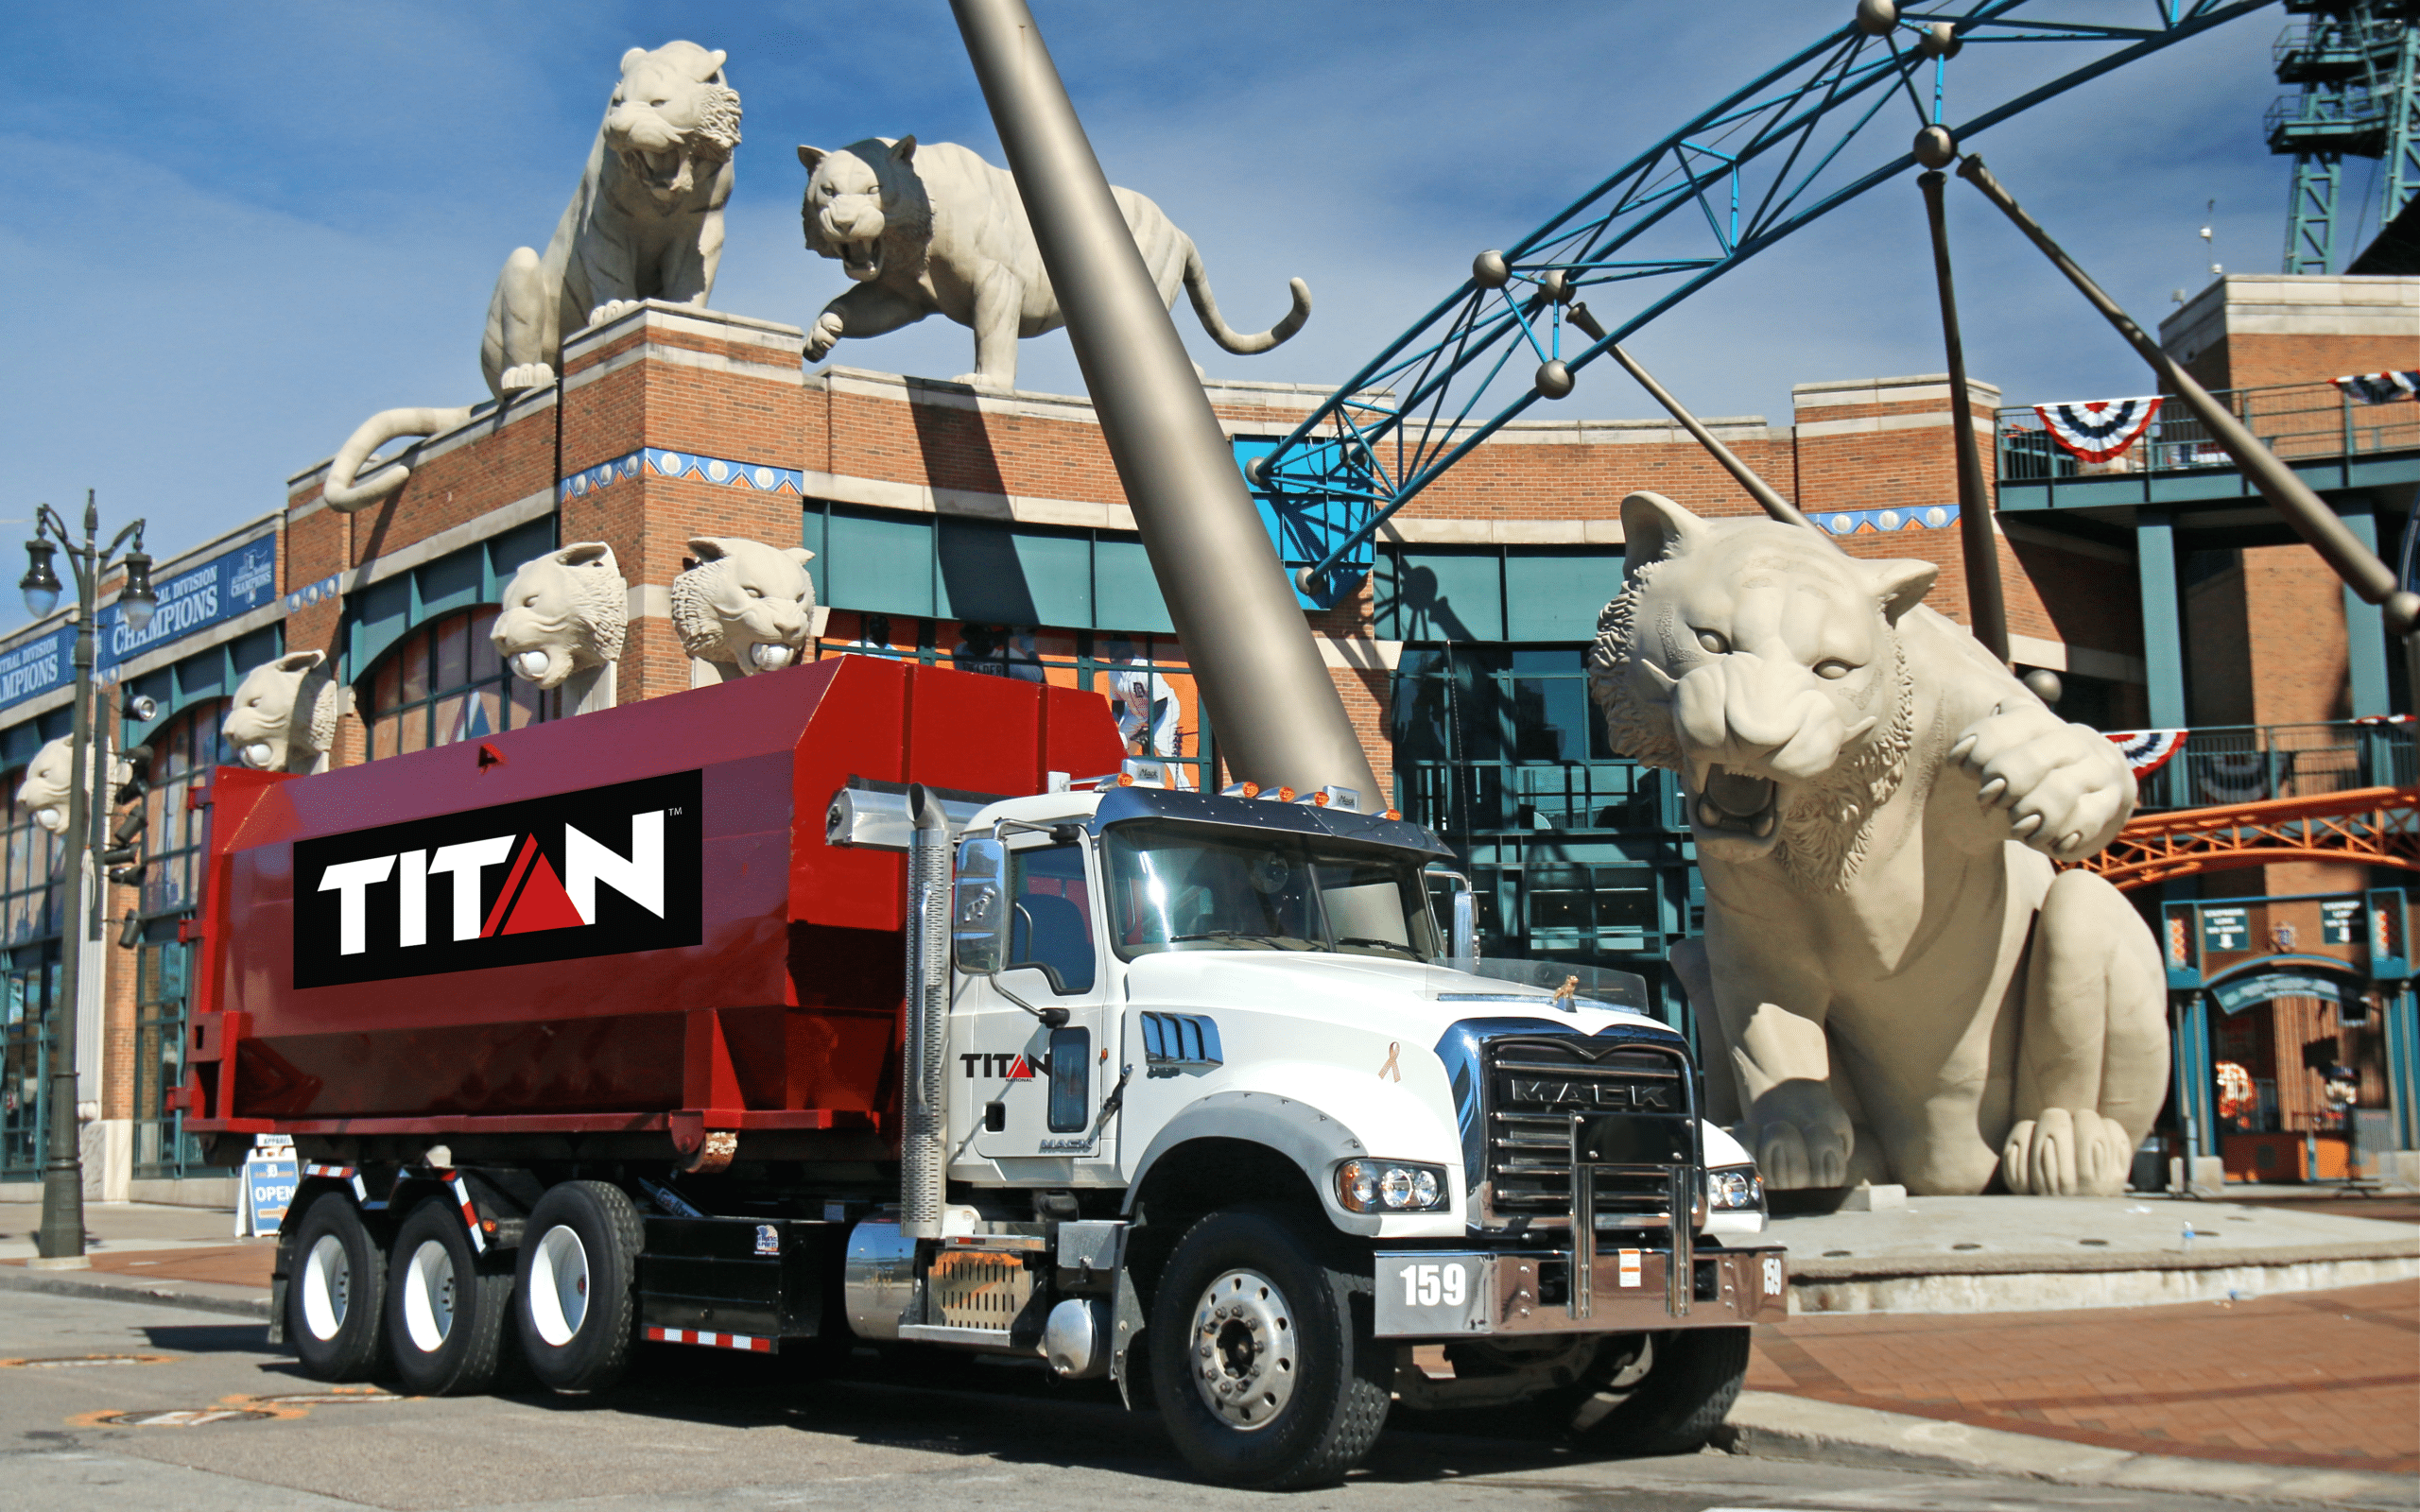 Titan Environmental Roll off Dumpster Truck in front of Comerica Park, Detroit Michigan.